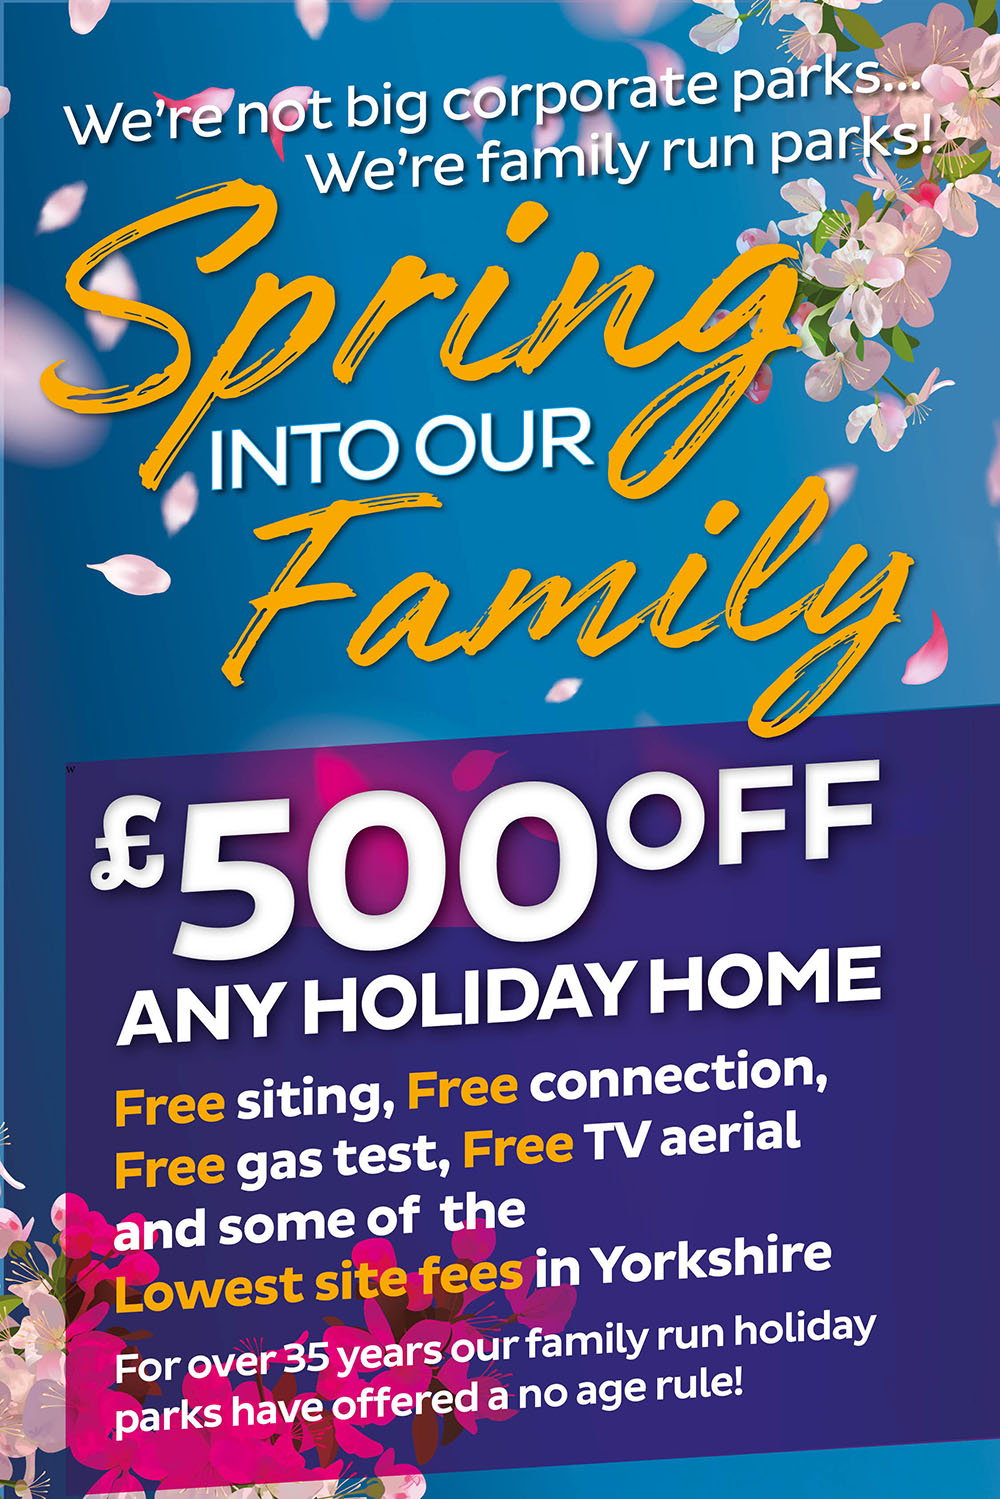 We're not big corporate parks, we're family run parks. £500 off any holiday home. Free siting, free connection, free gas test, free TV aerial and some of the lowest site fees in Yorkshire.